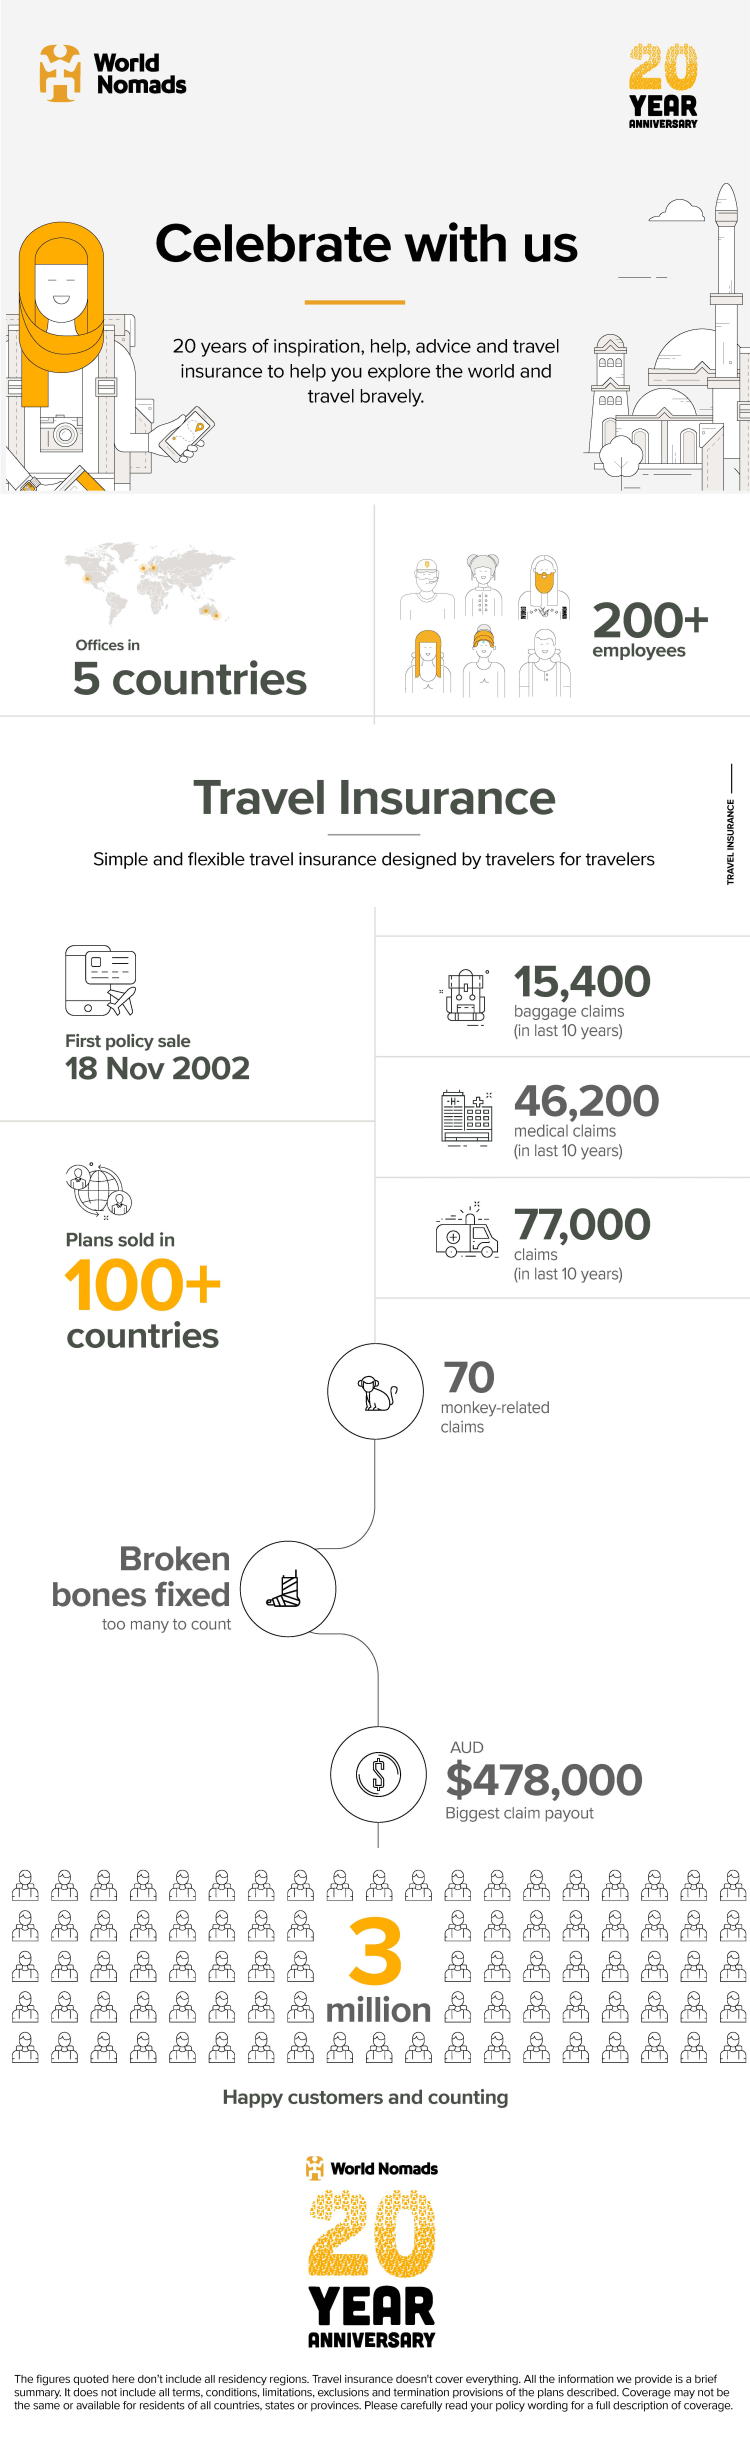 Infographic of milestones over World Nomads' 20 years in business.